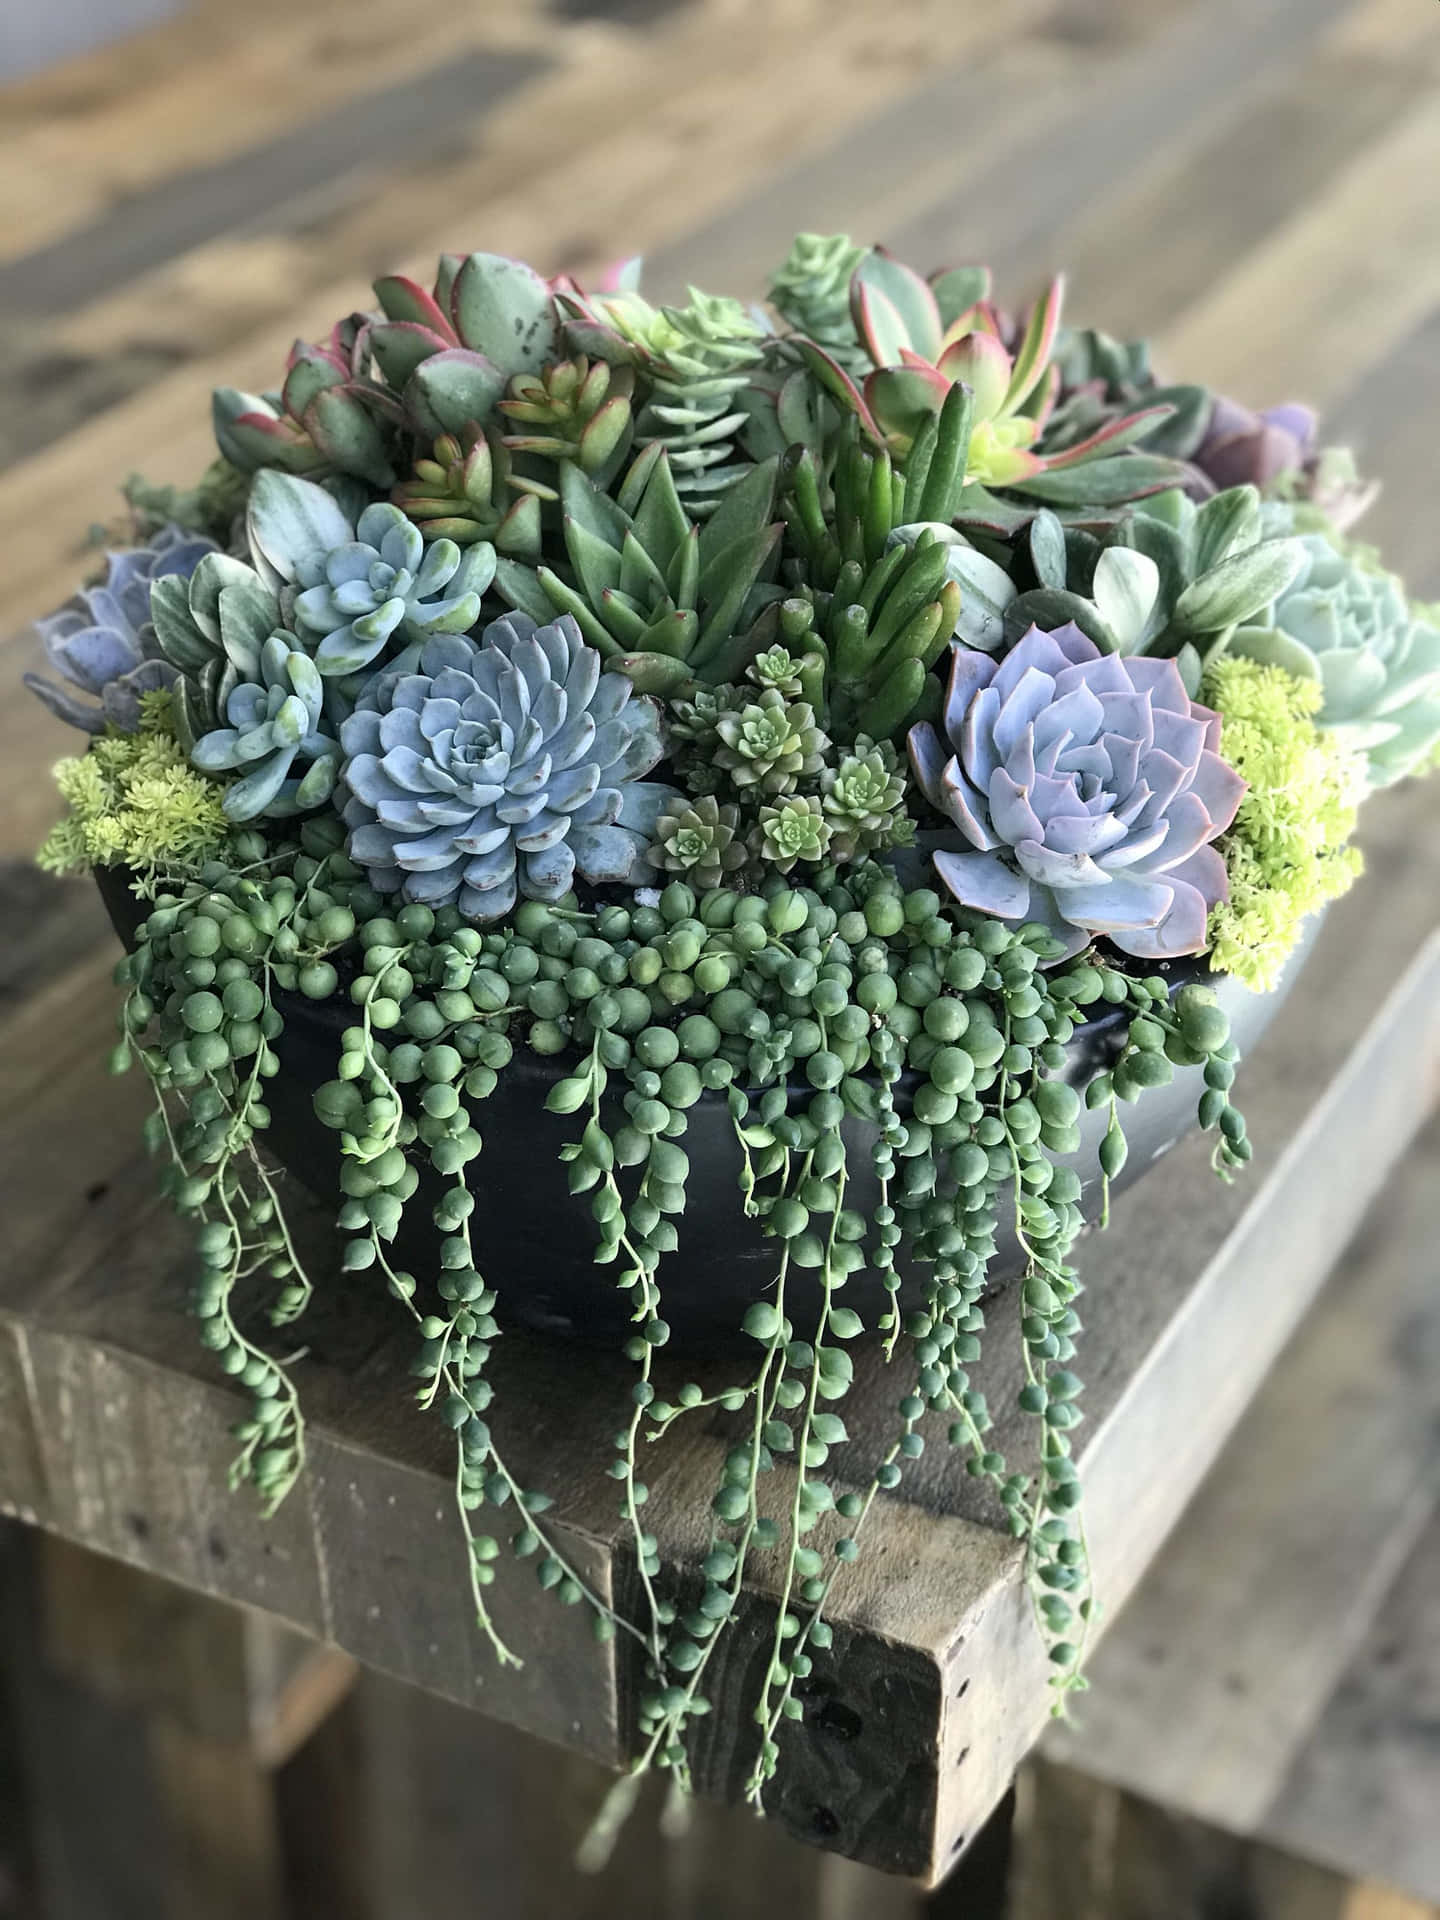 A Large Arrangement Of Succulents On A Wooden Table